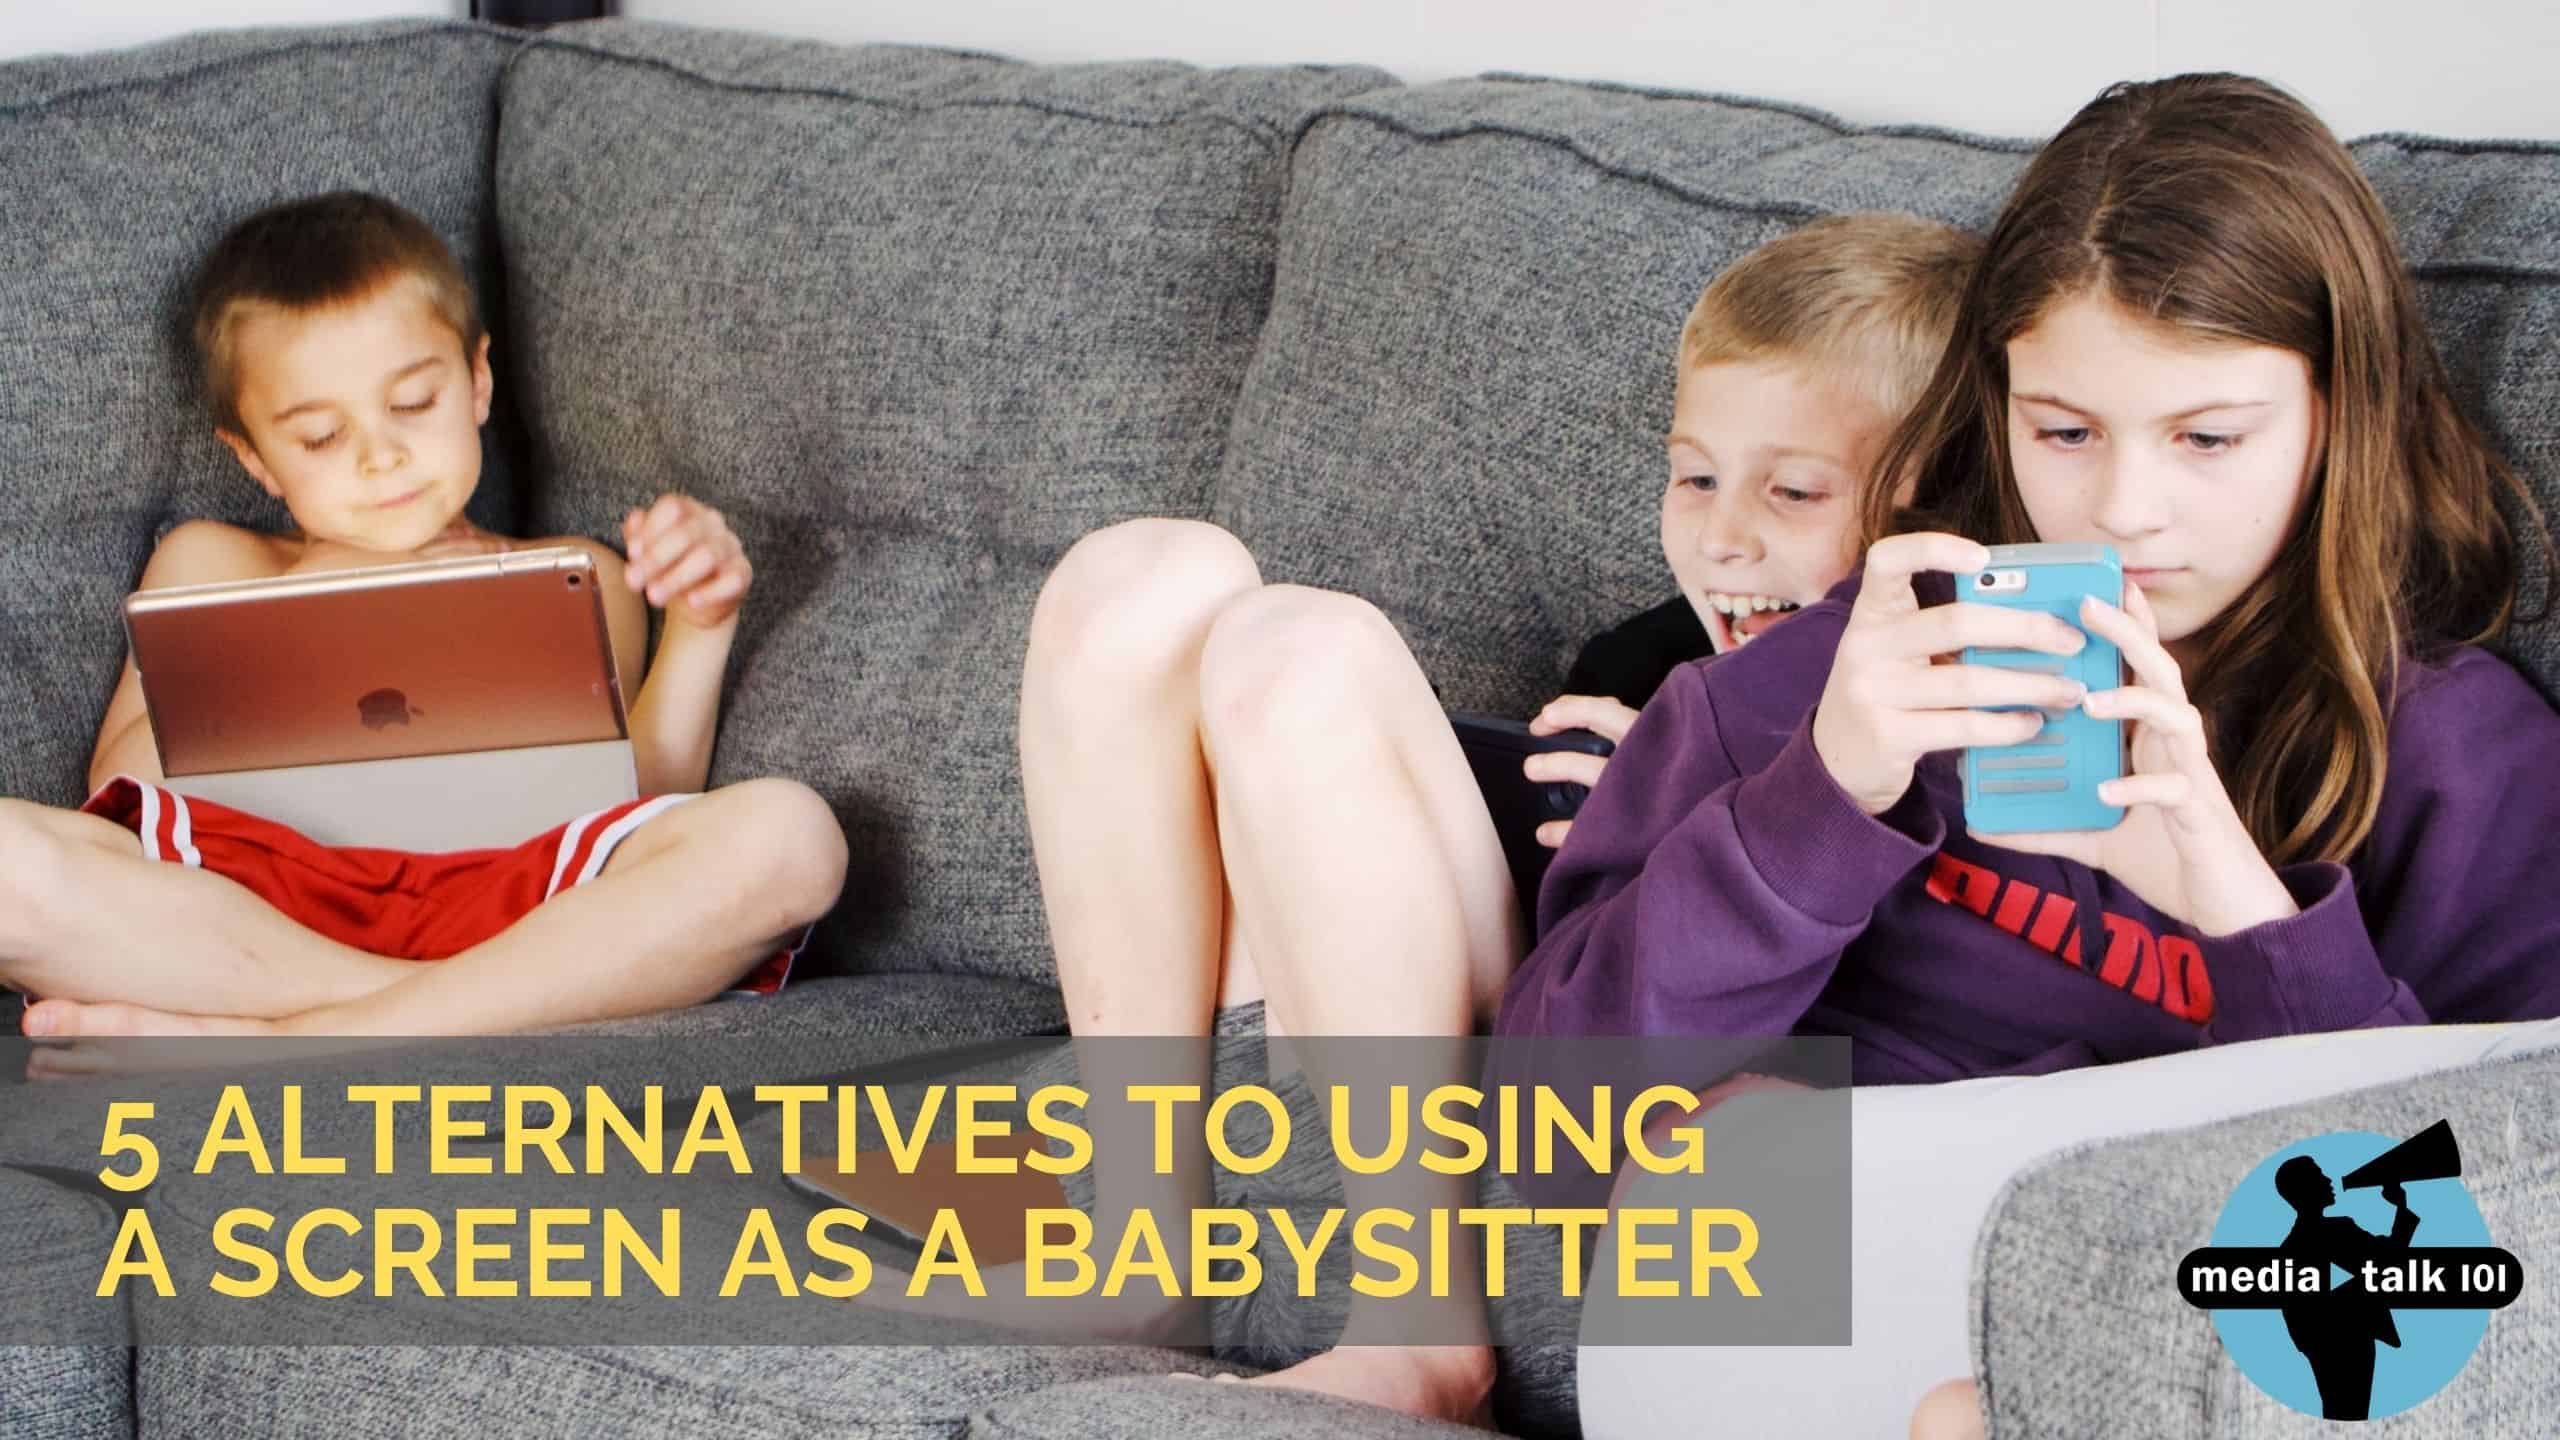 5 Alternatives to Using a Screen as a Babysitter image